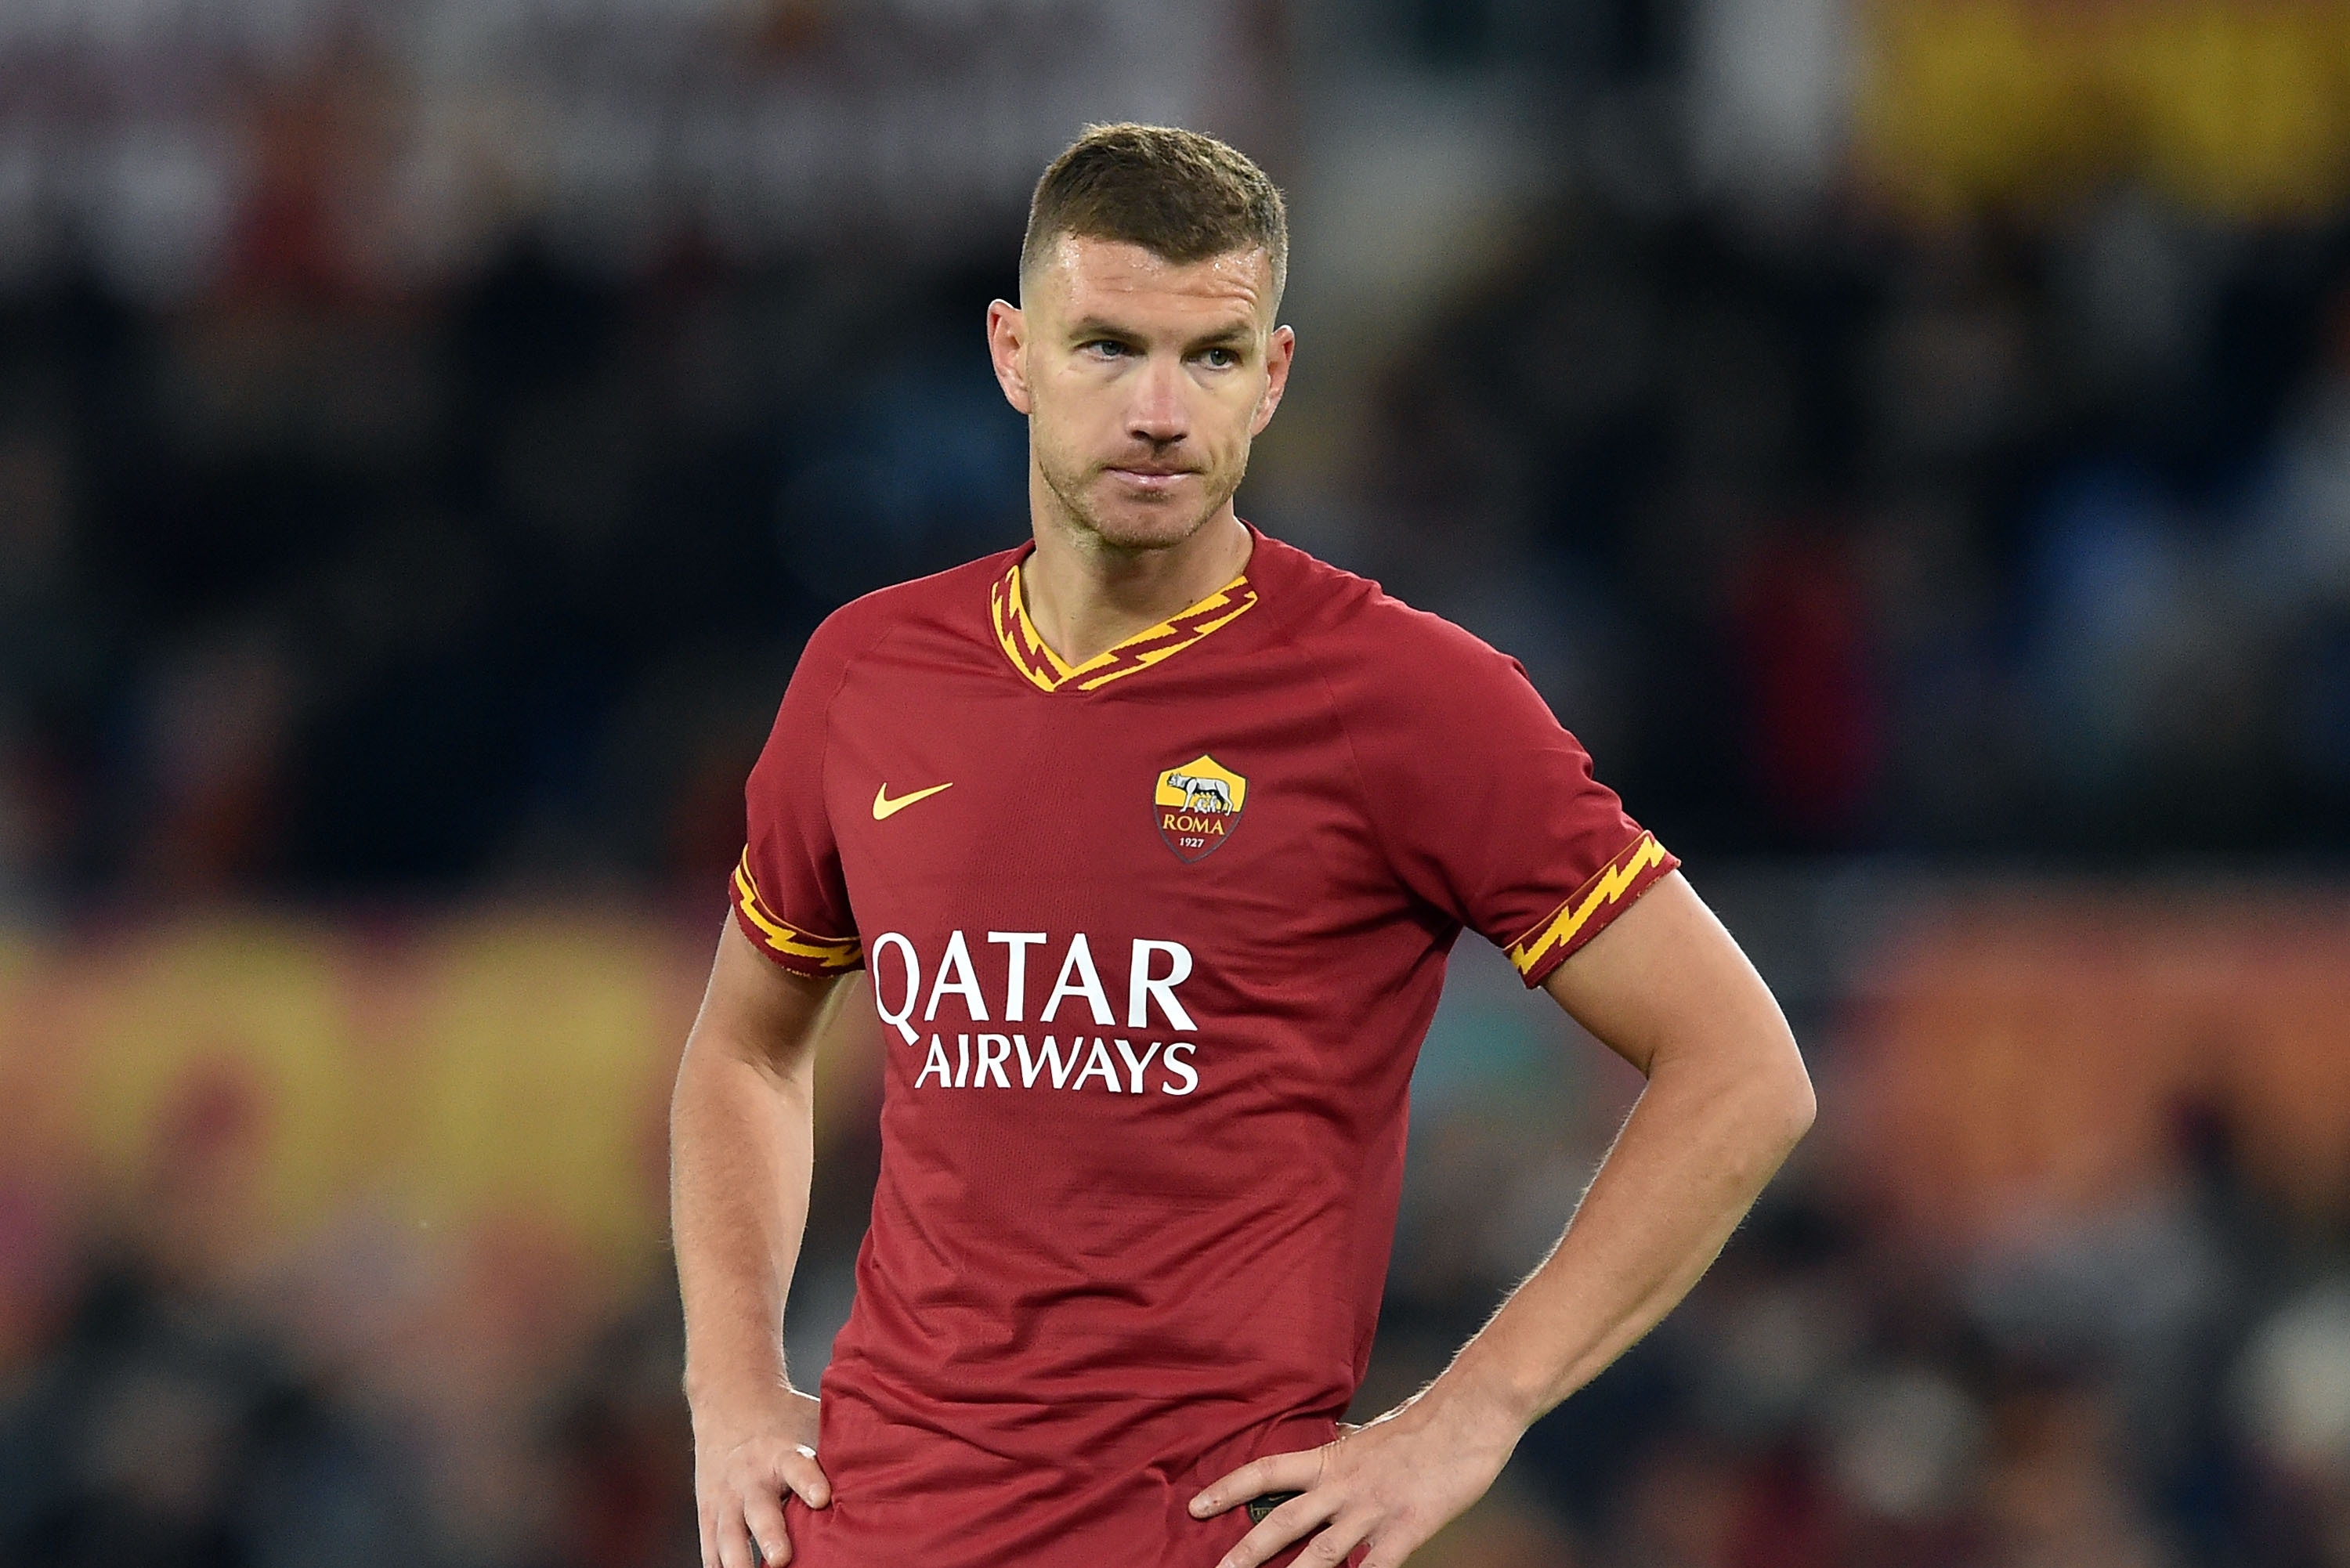 Roma's Edin Dzeko Says He Doesn't Think About Rejected Inter Milan Transfer | Bleacher Report | Latest News, Videos and Highlights